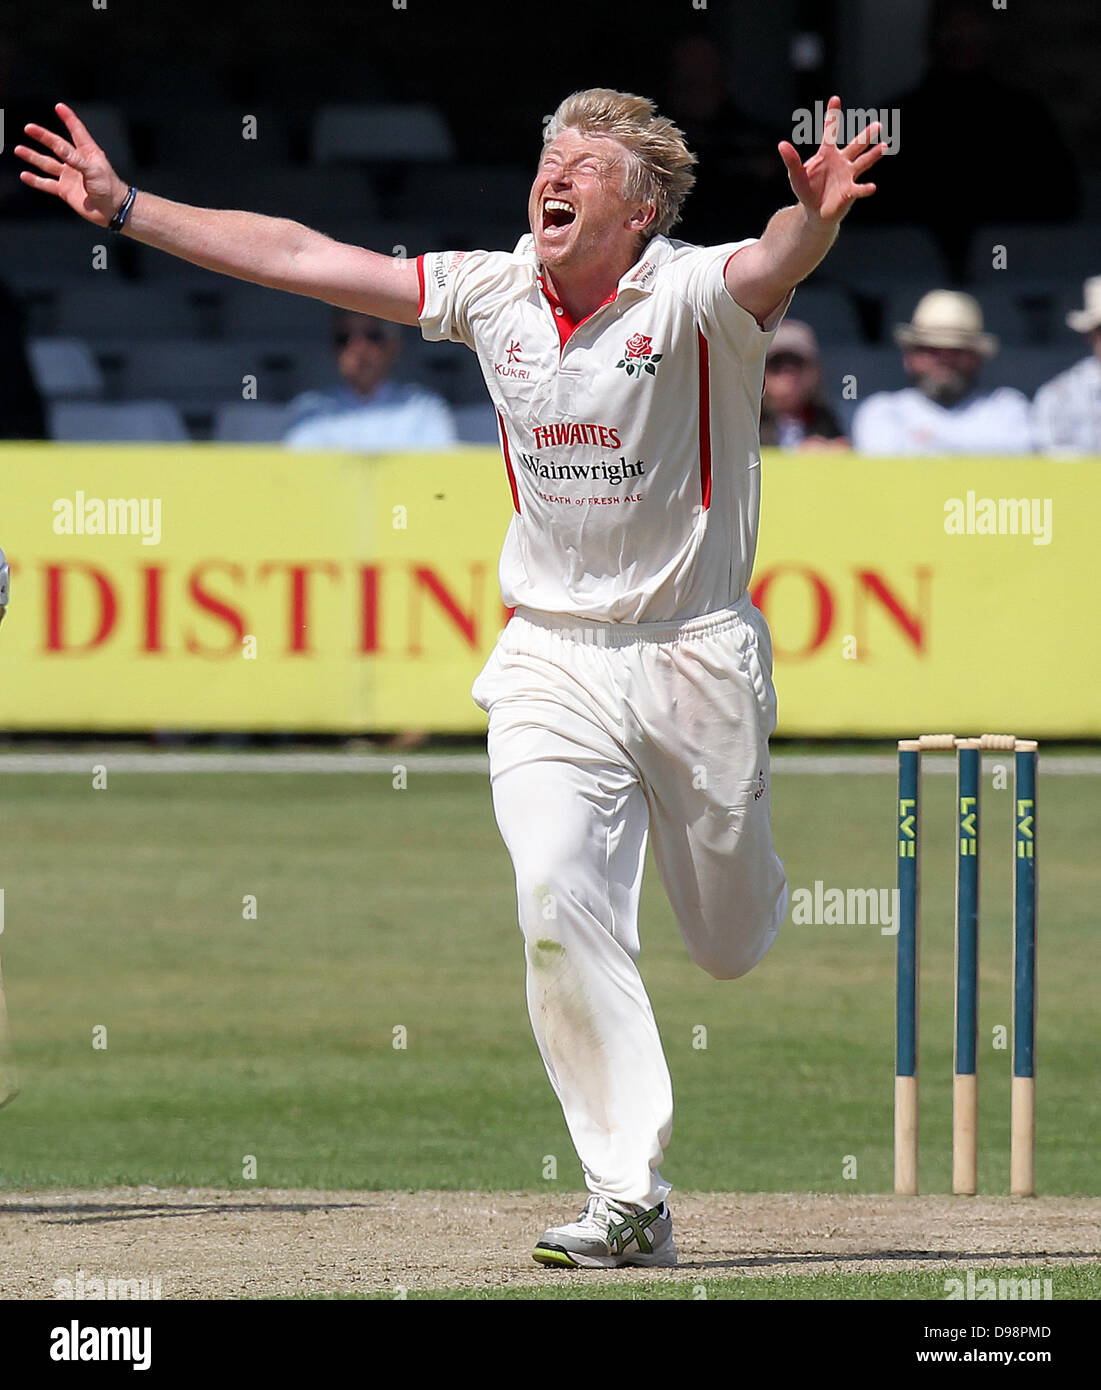 14.06.2013 Chelmsford, Essex. LV County Championship - Glen Chapple celebrates more bowling success for Lancashire  -  Essex CCC vs Lancashire CCC.  Essex were bowled out for a low score of 20 runs. Stock Photo